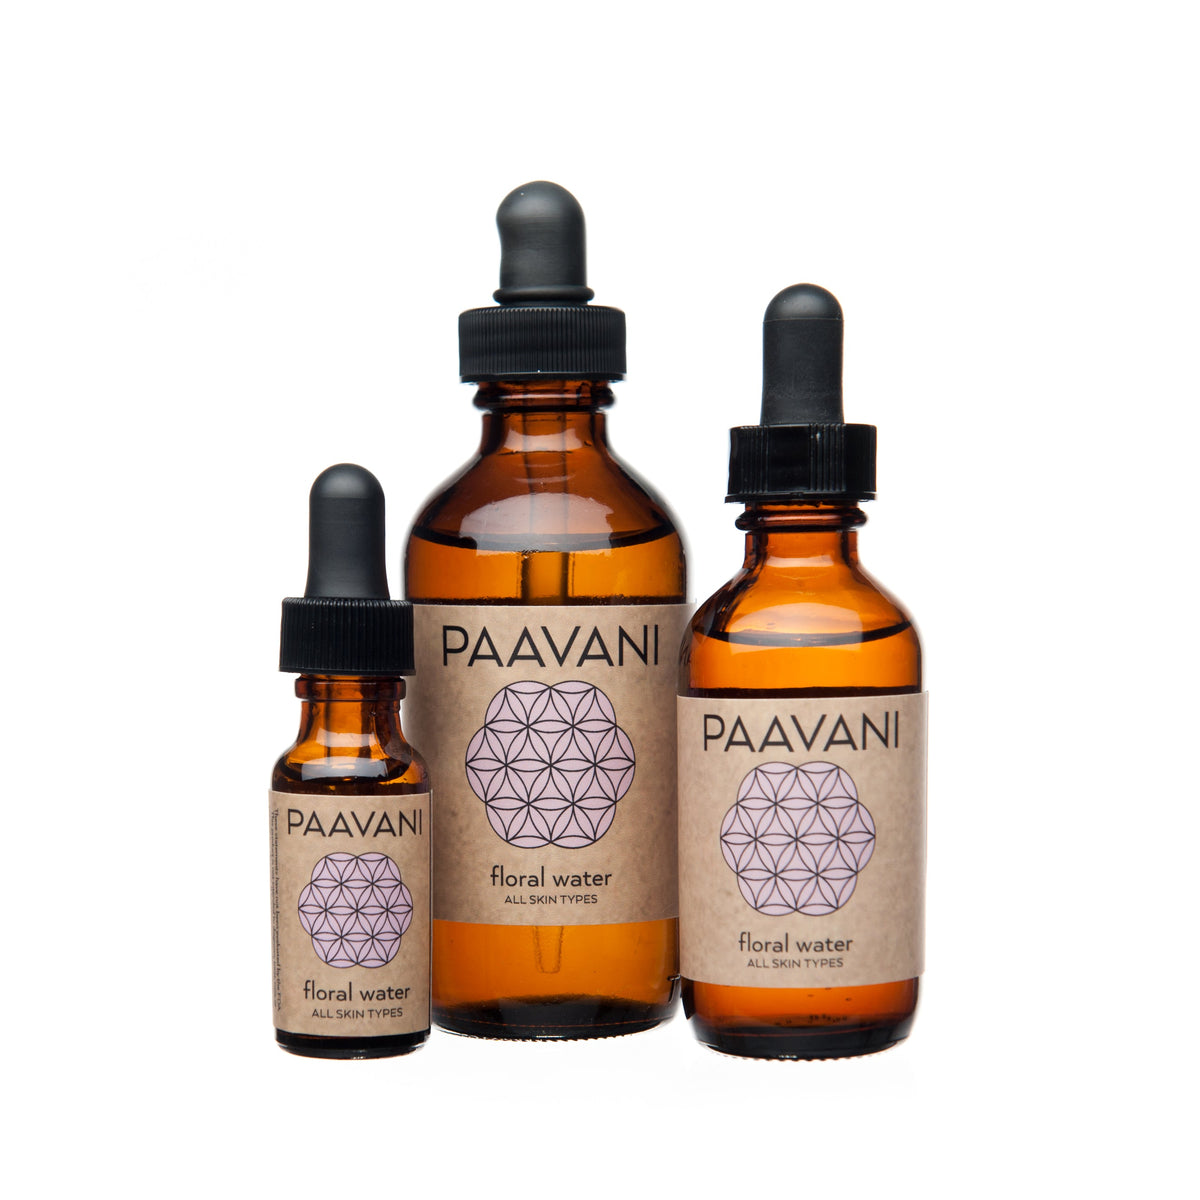 * Paavani Ayurveda - Floral Water, Floral Notes of Rose and Lavender, All Skin Types, Ayurvedic Skincare-1